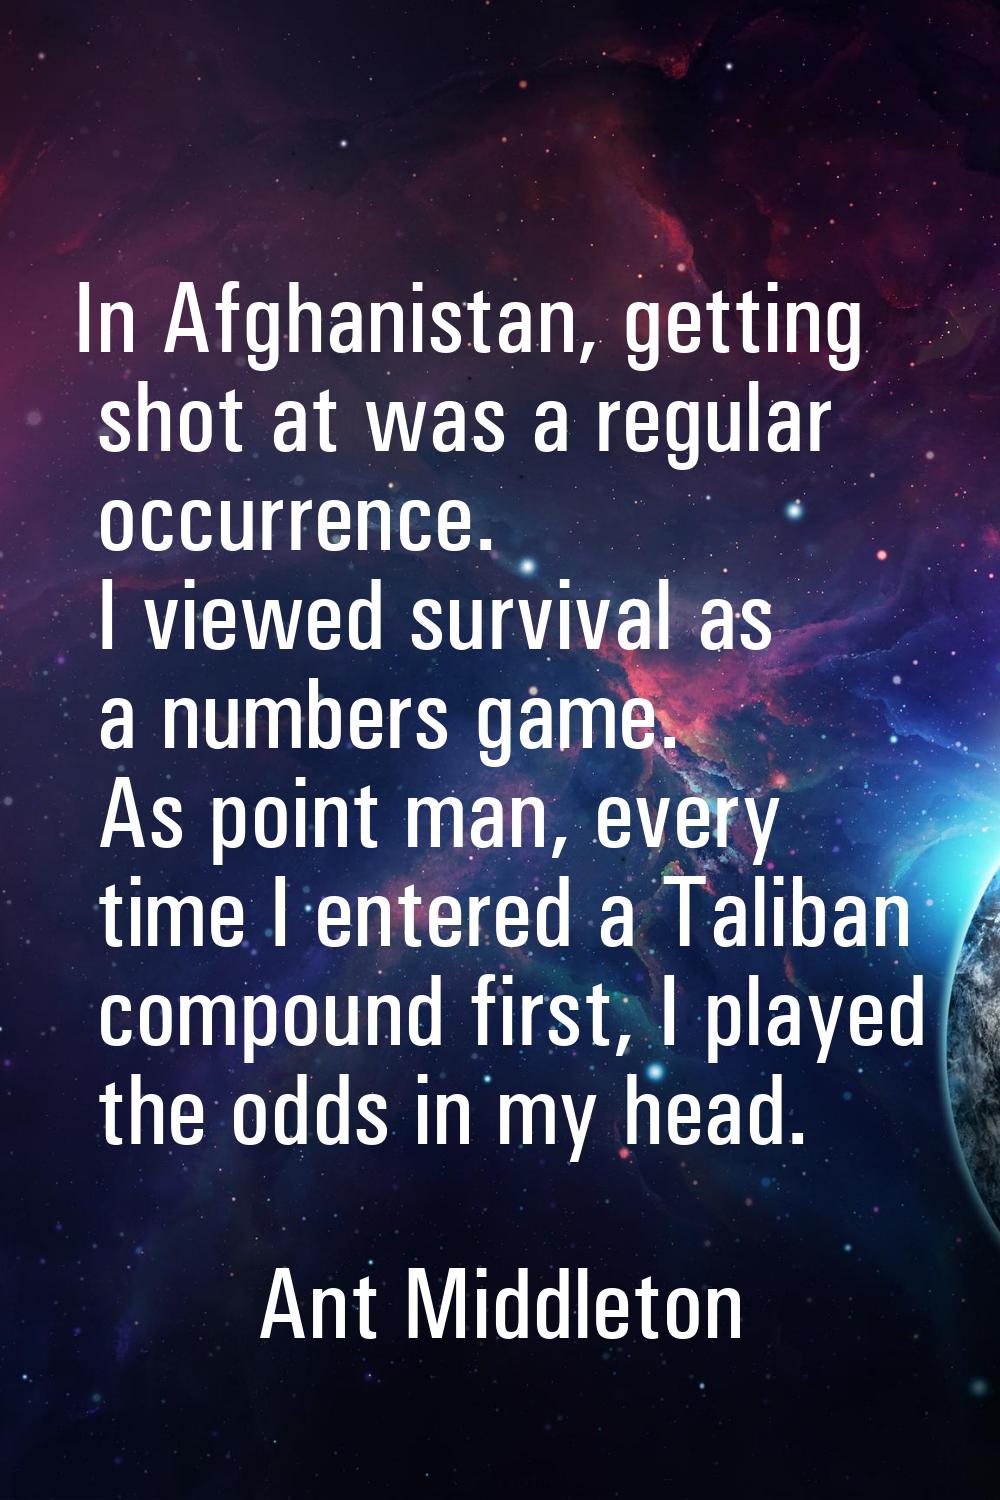 In Afghanistan, getting shot at was a regular occurrence. I viewed survival as a numbers game. As p